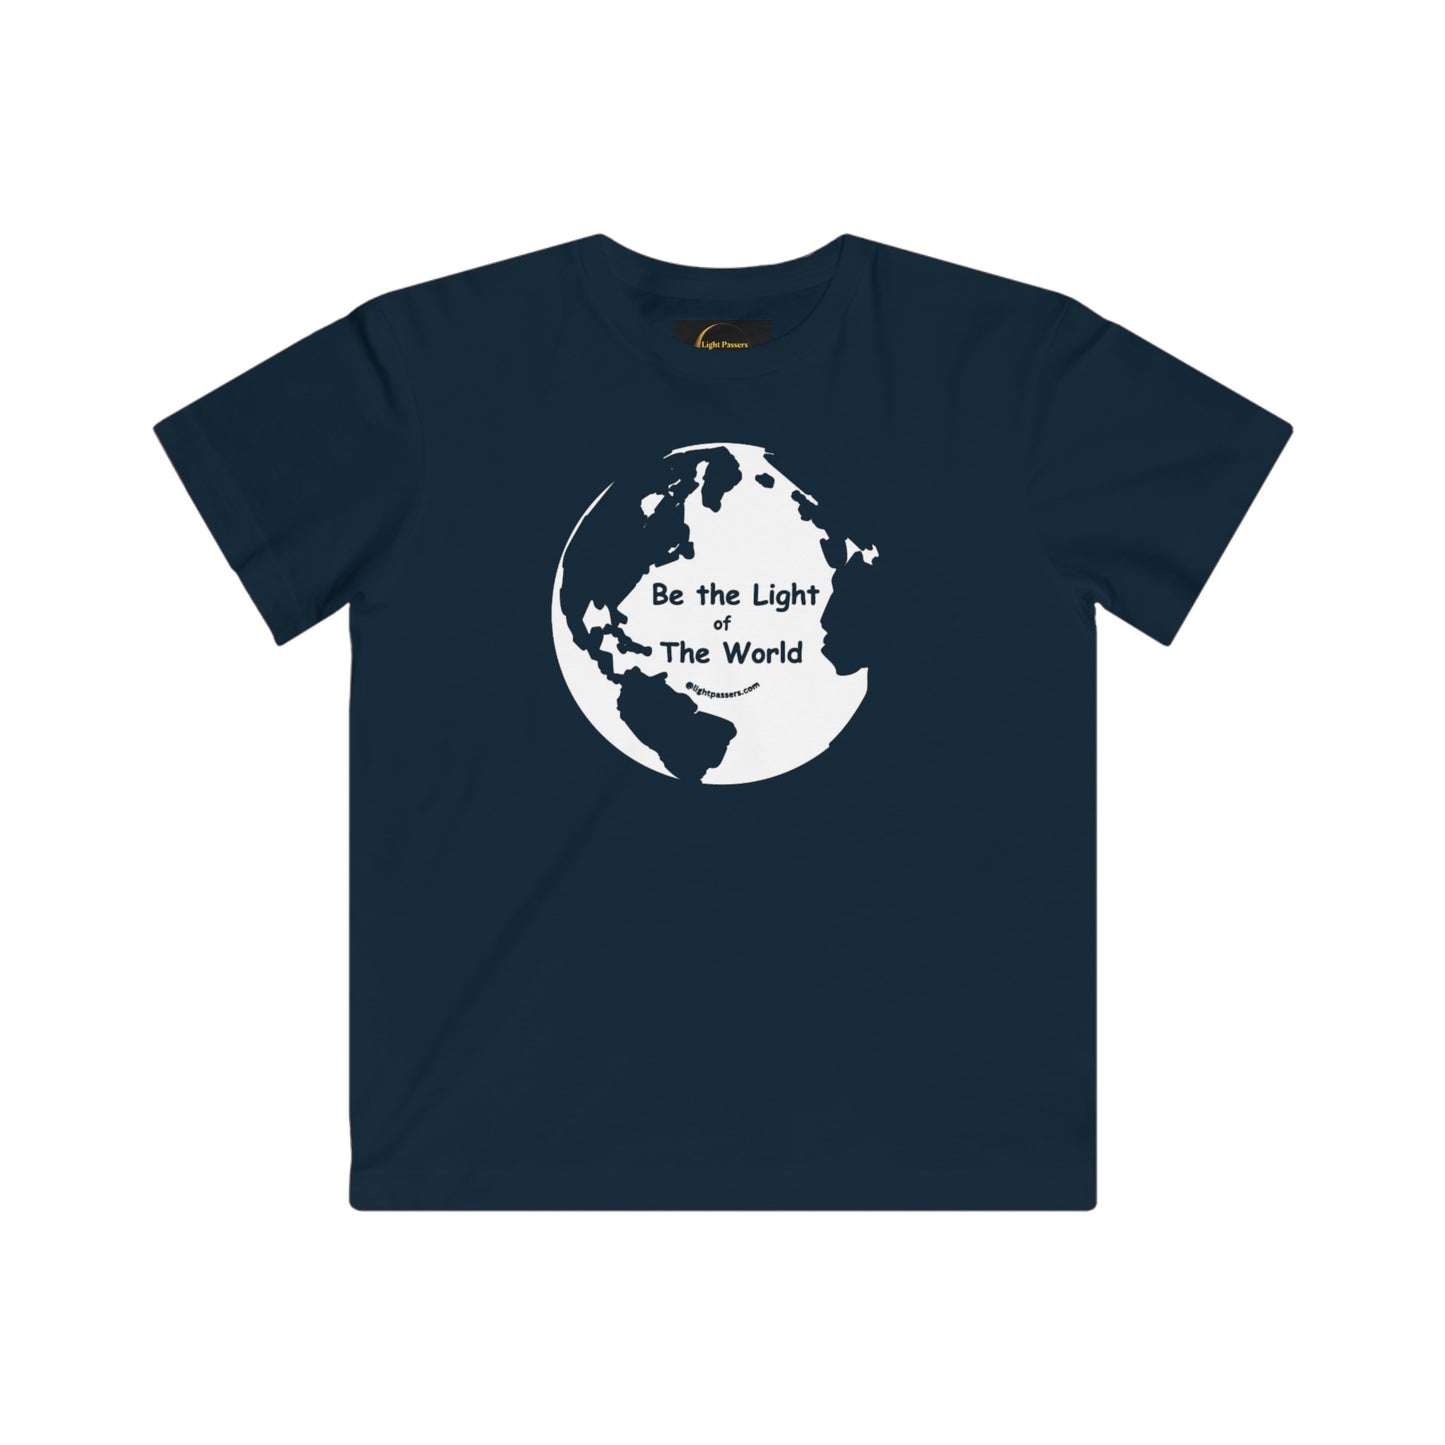 Youth t-shirt featuring a blue shirt with a white globe and text design. Super soft fabric, 100% combed ringspun cotton, light (4.5 oz/yd²), tear away label, regular fit, true to size.